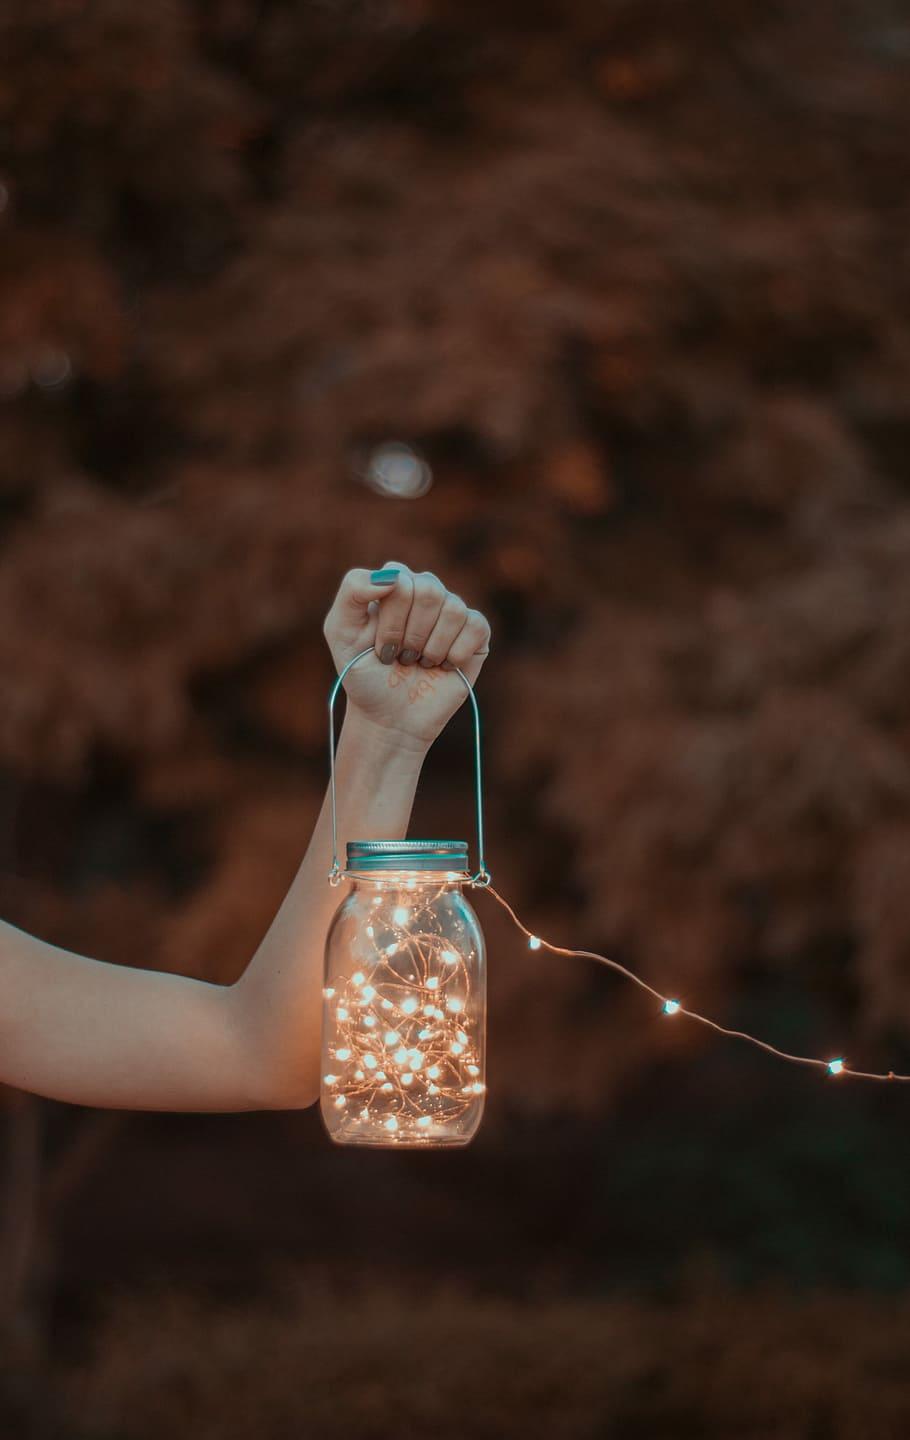 HD wallpaper: person holding mason jar with string lights